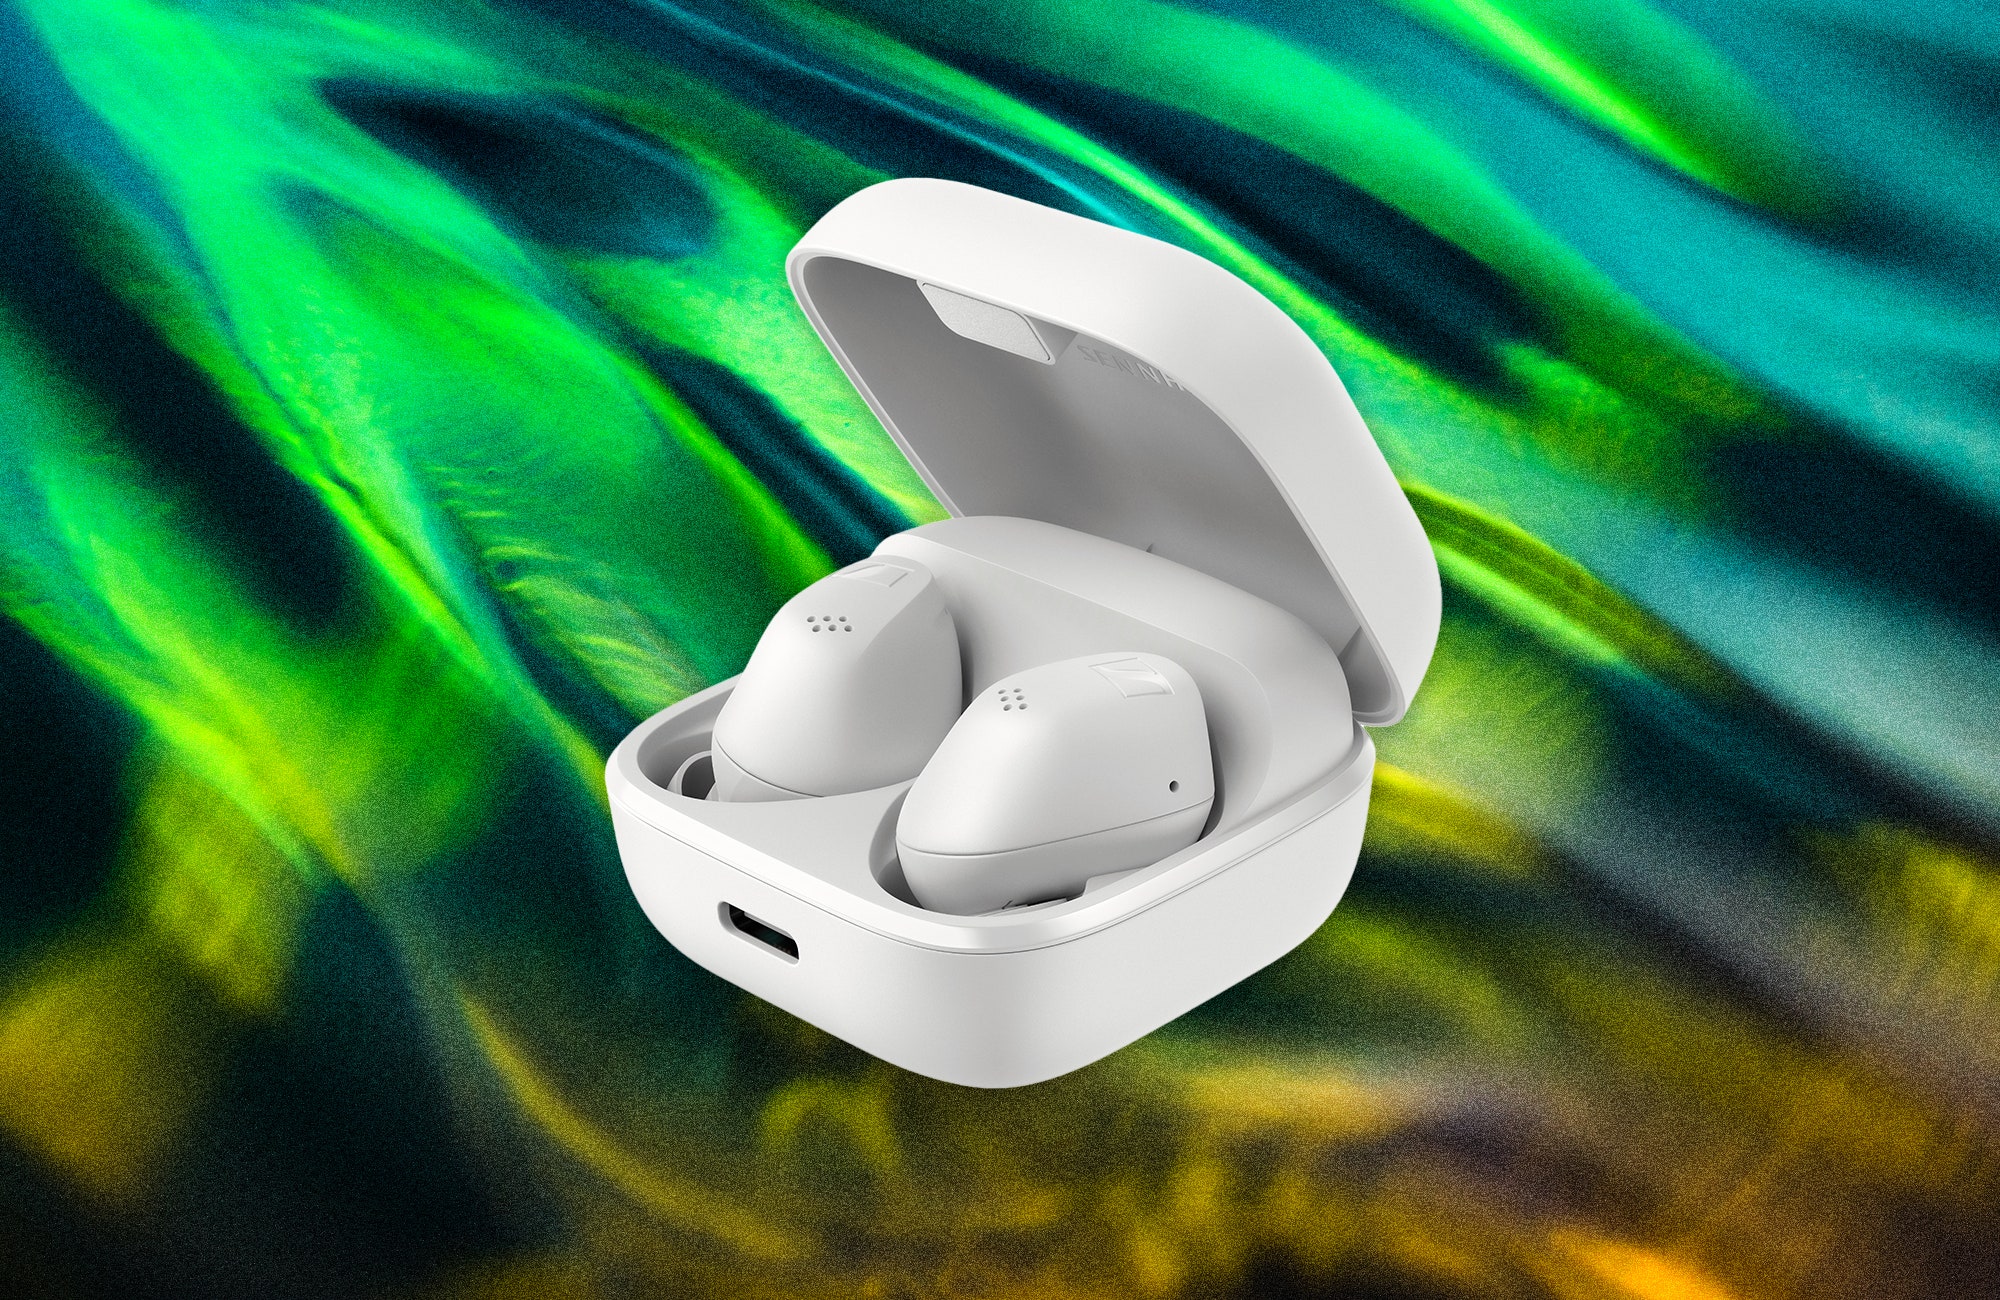 White squareshaped clamshell case opened showing two inear earbuds docked inside